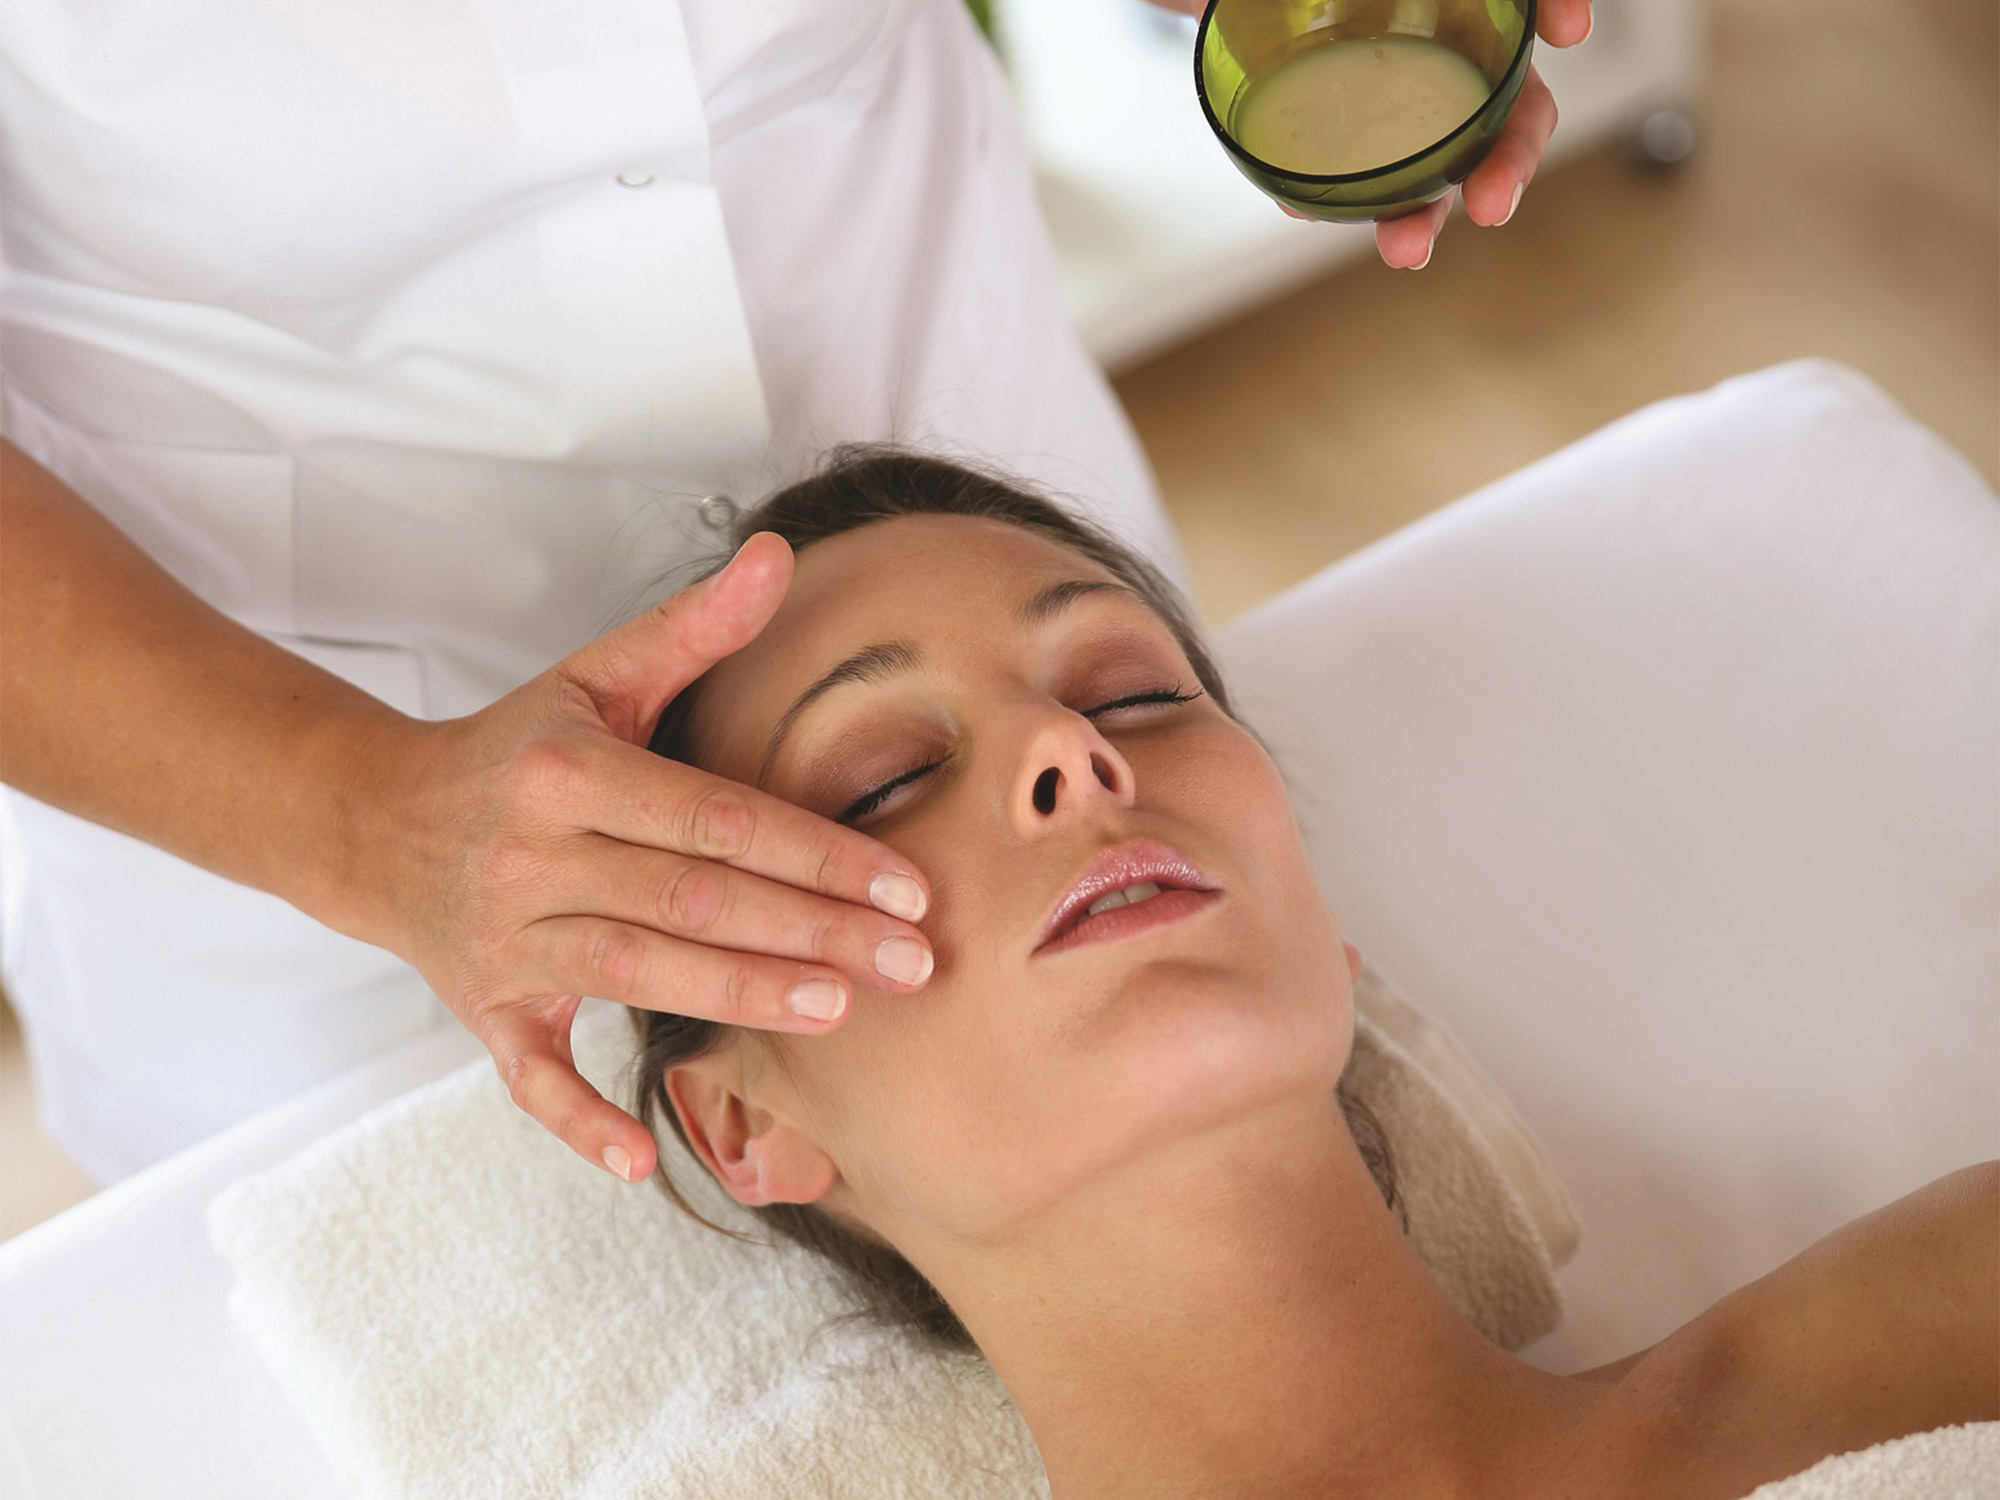 a woman at a spa getting some facial services done